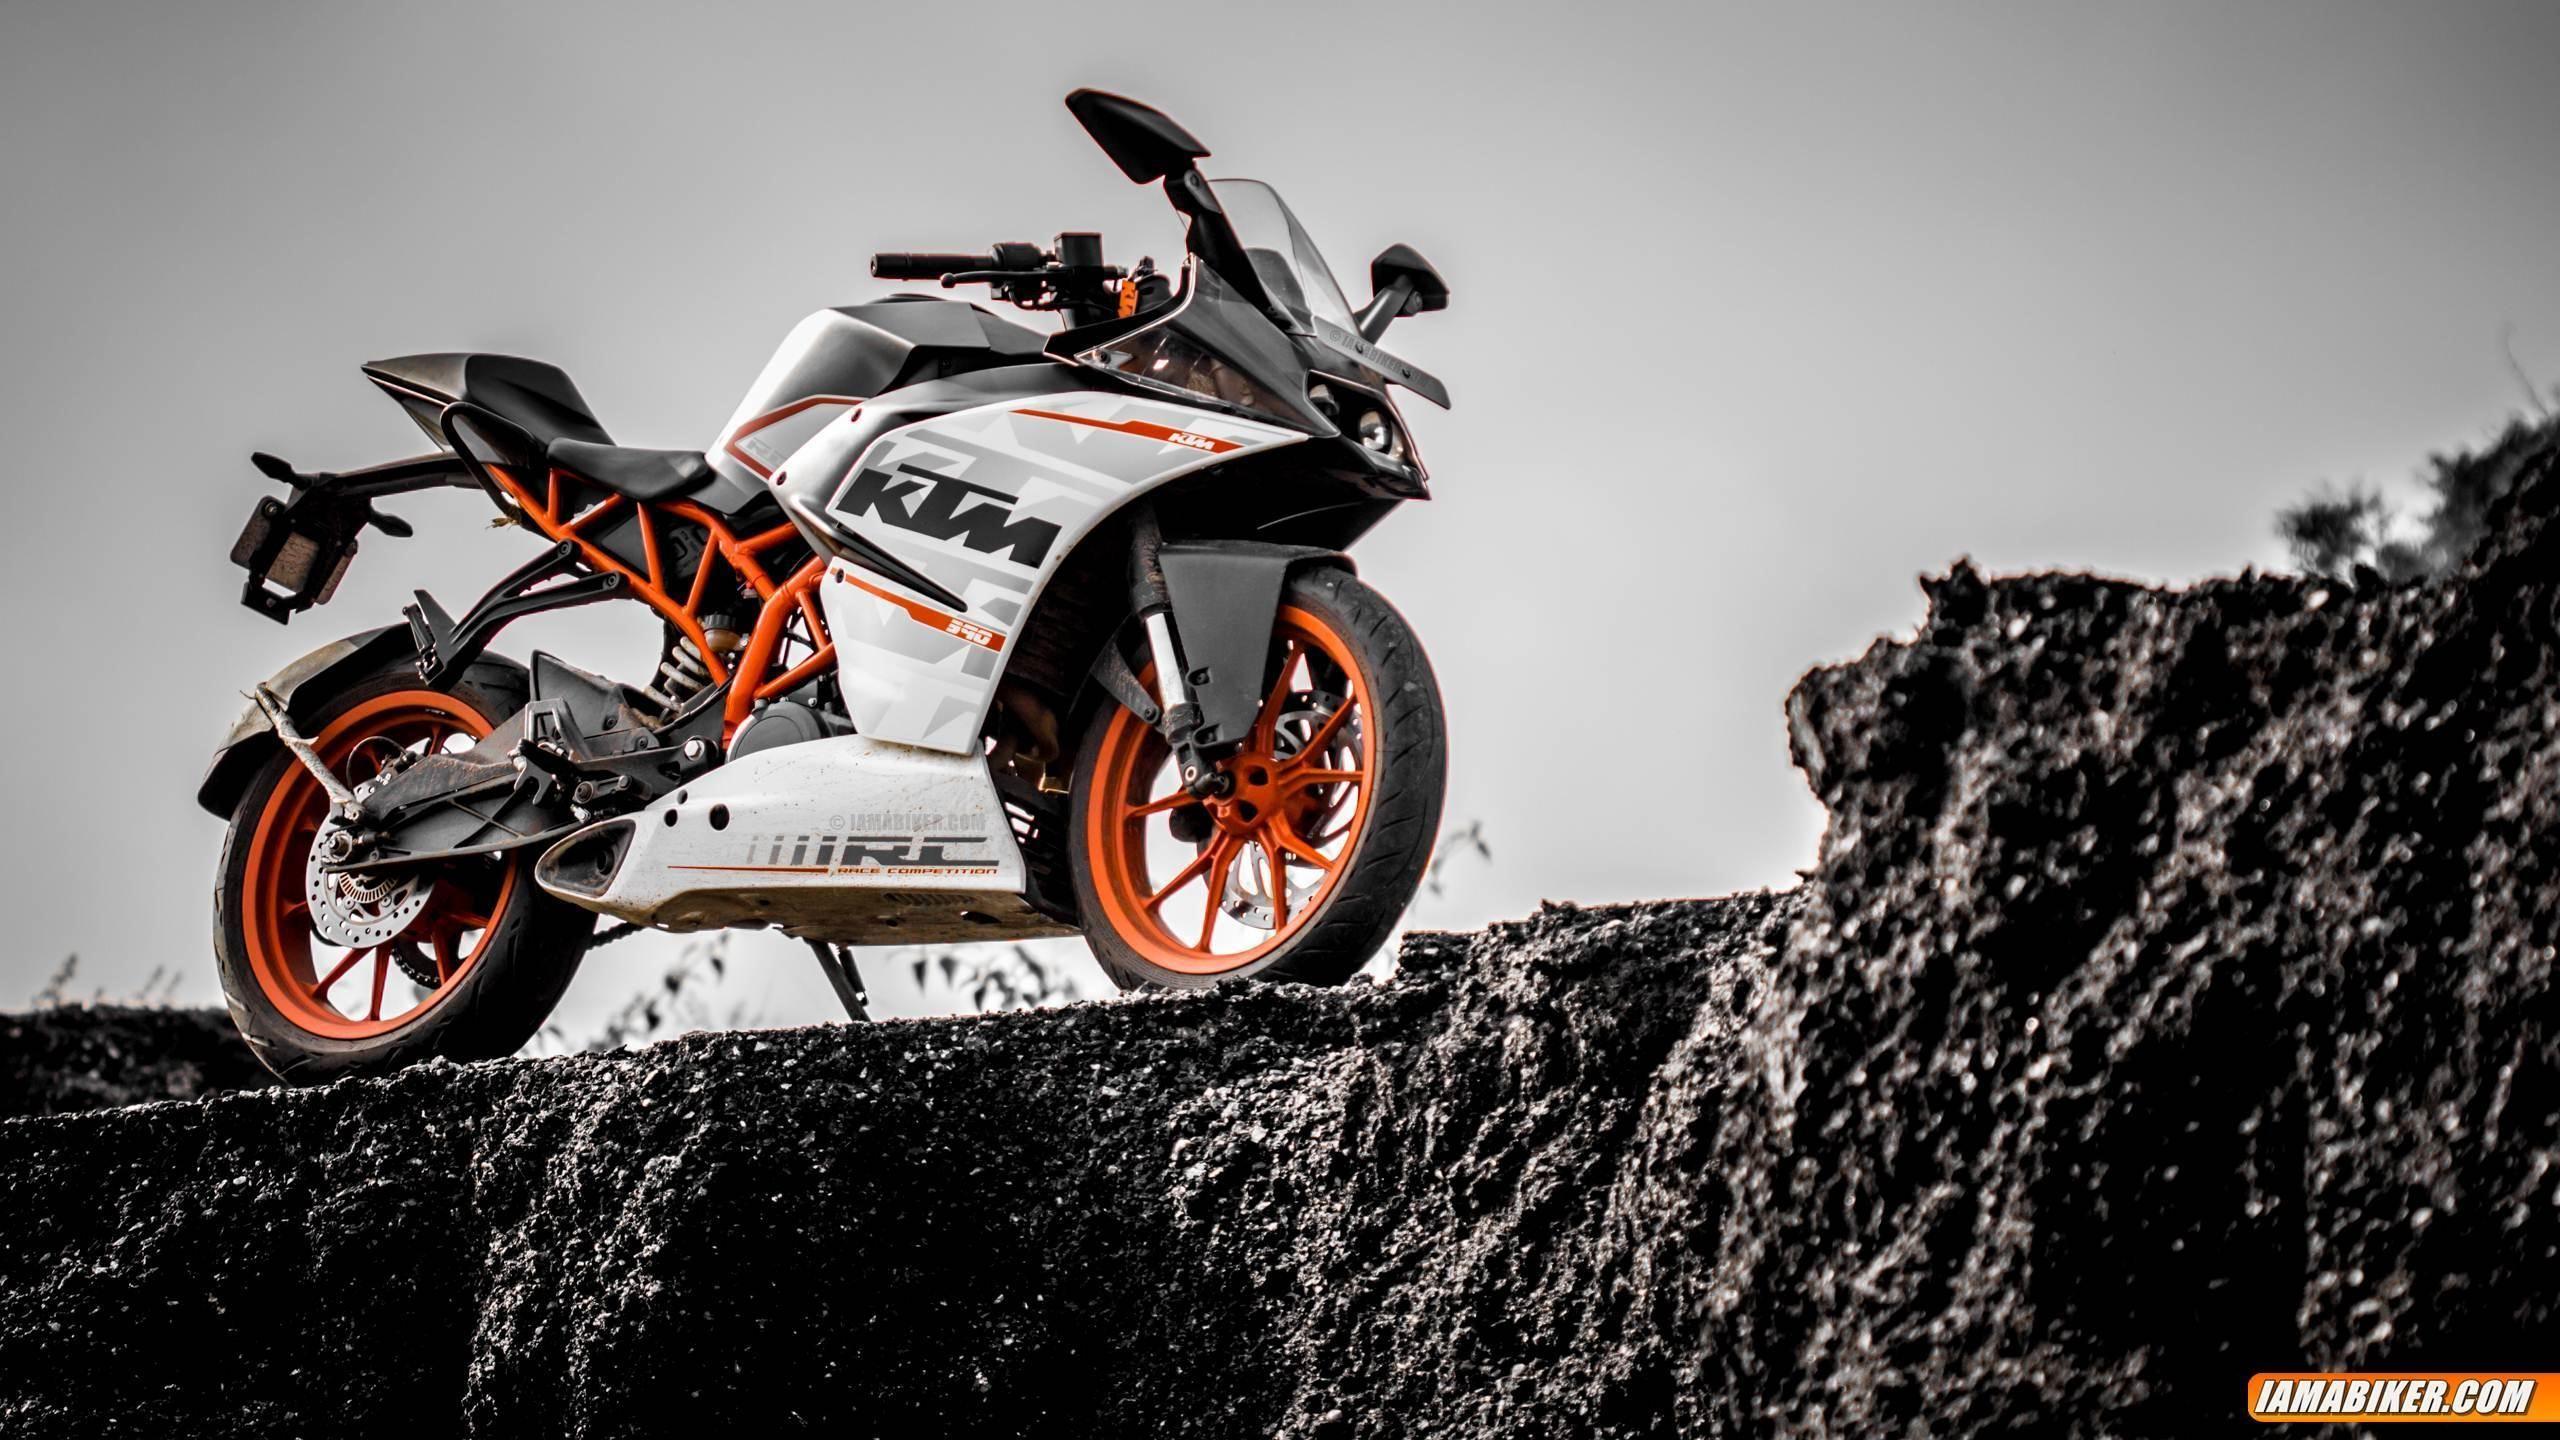 Follow Us To Get updates from the exciting world of KTM ktmindia  ReadyToRace ktm r  Black background images Studio background images  Background images hd